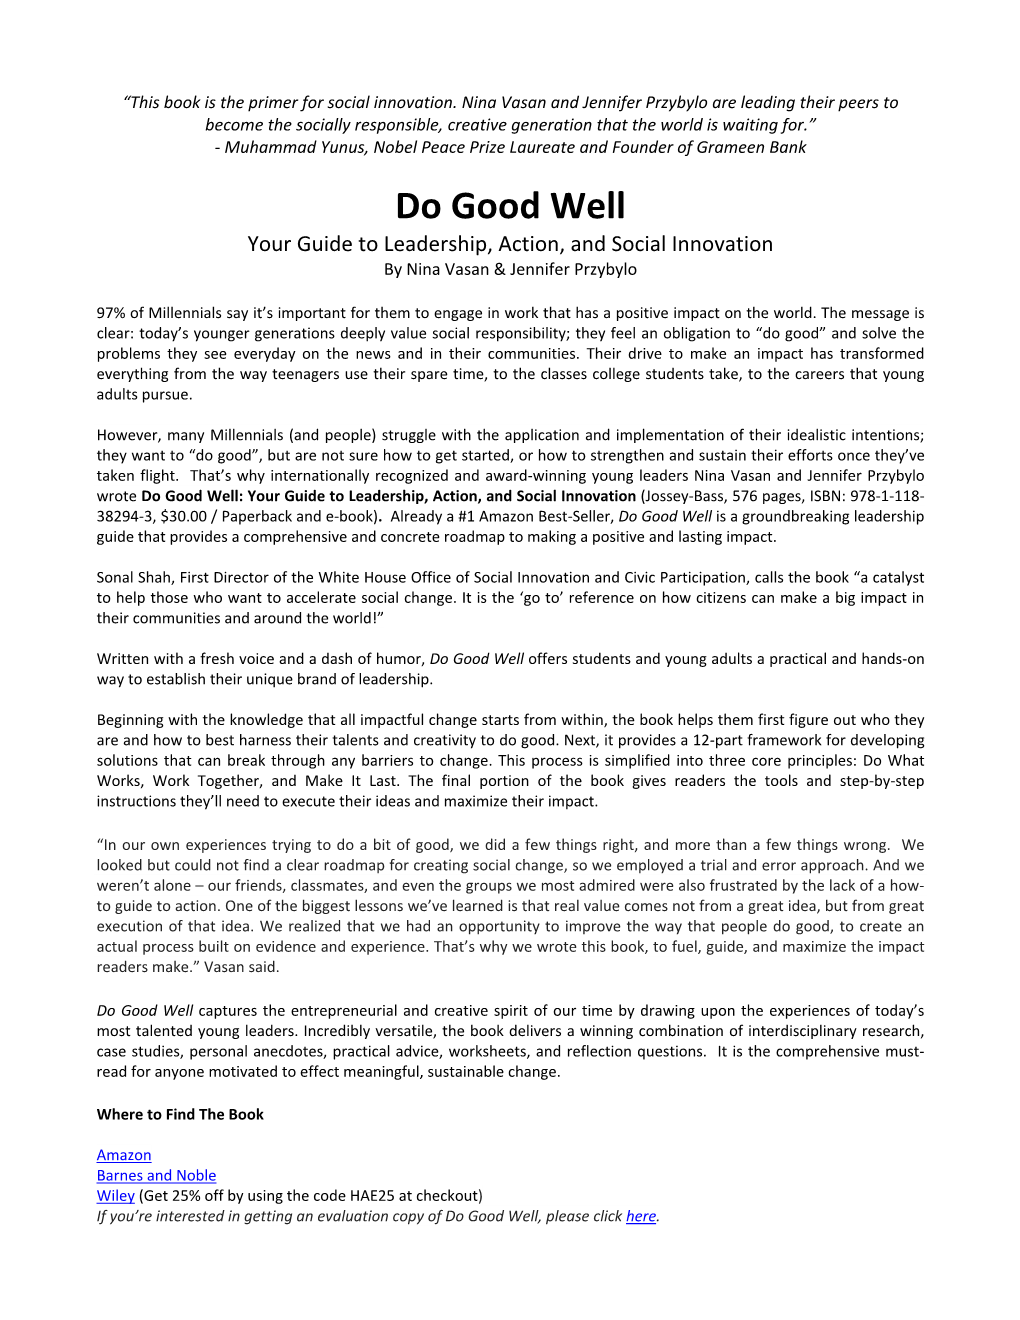 Do Good Well Your Guide to Leadership, Action, and Social Innovation by Nina Vasan & Jennifer Przybylo